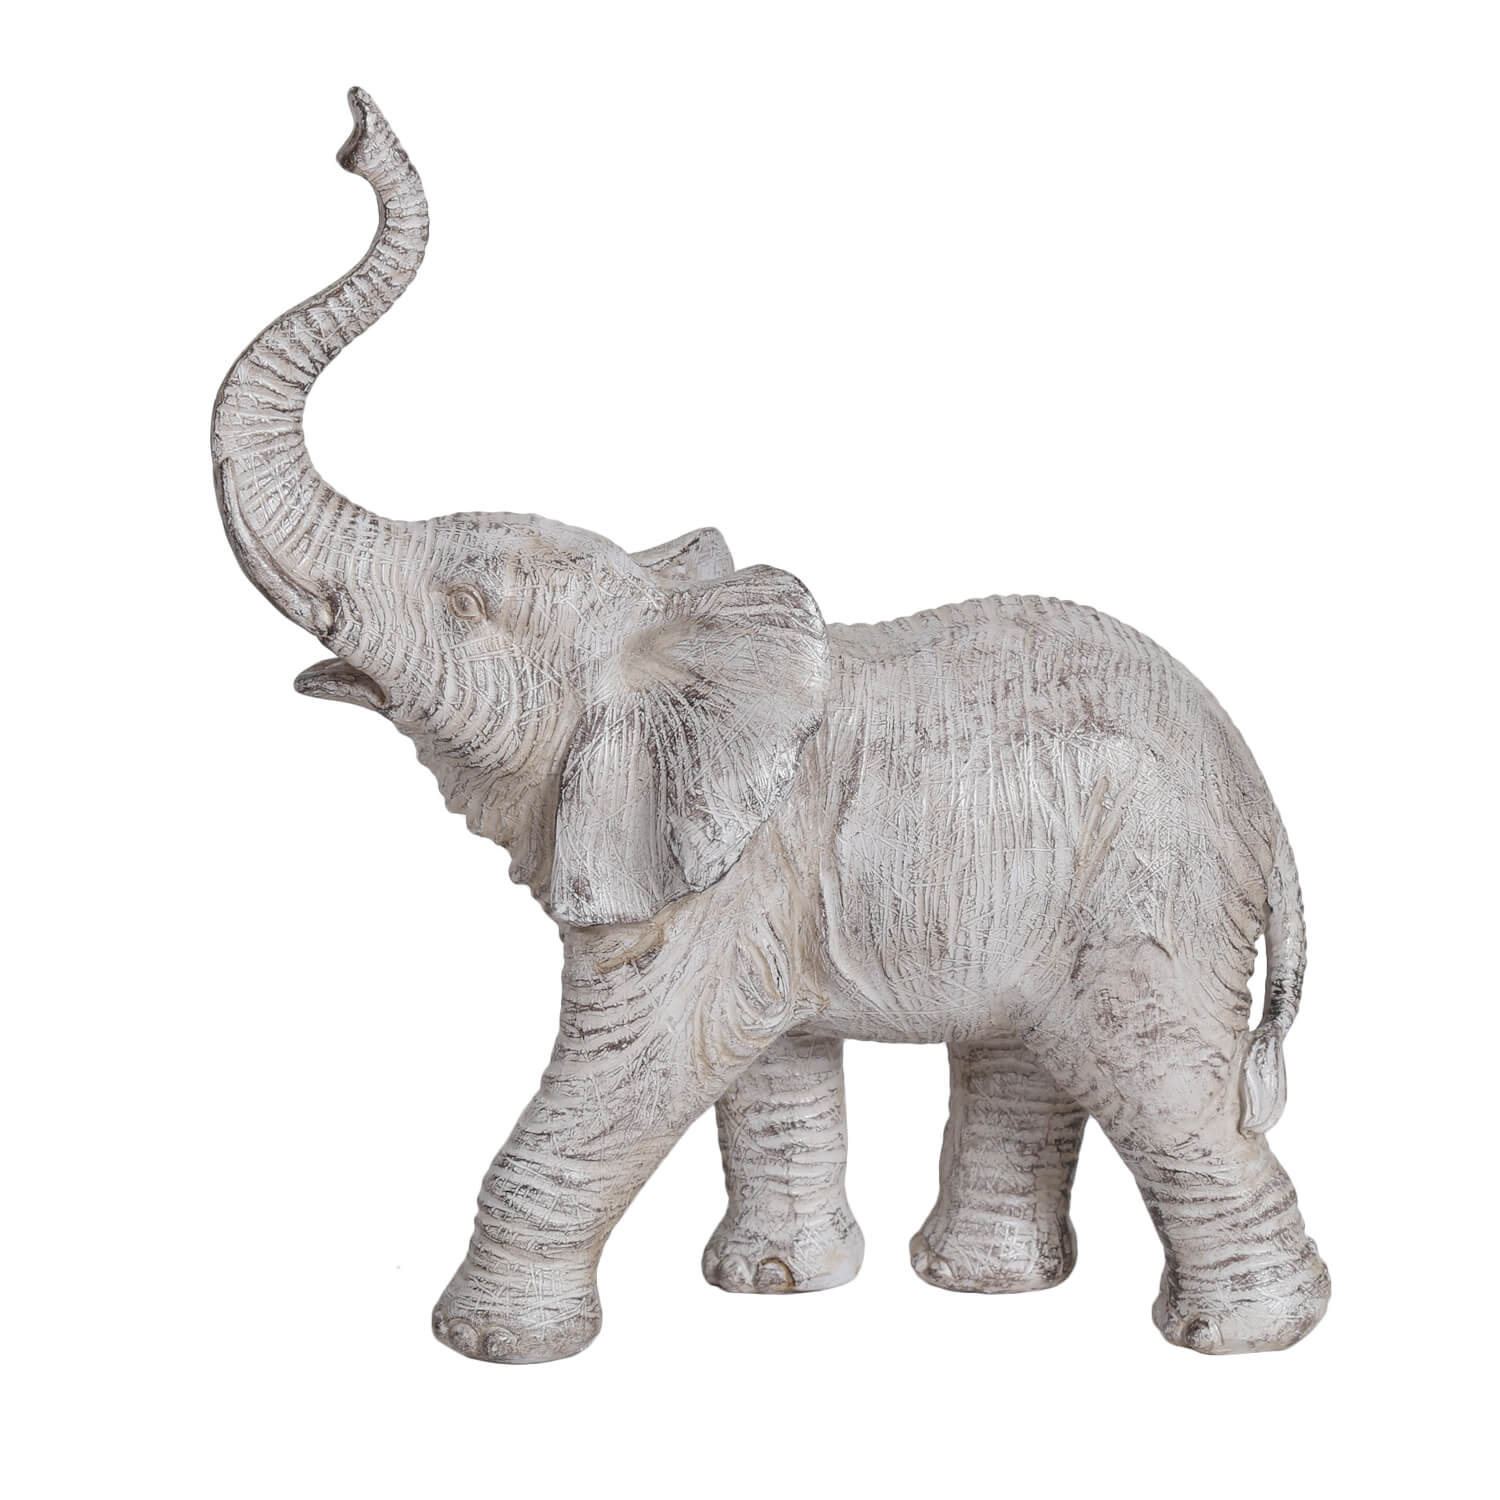 The Home Collection Elephant Figurine - 27.5cm 1 Shaws Department Stores